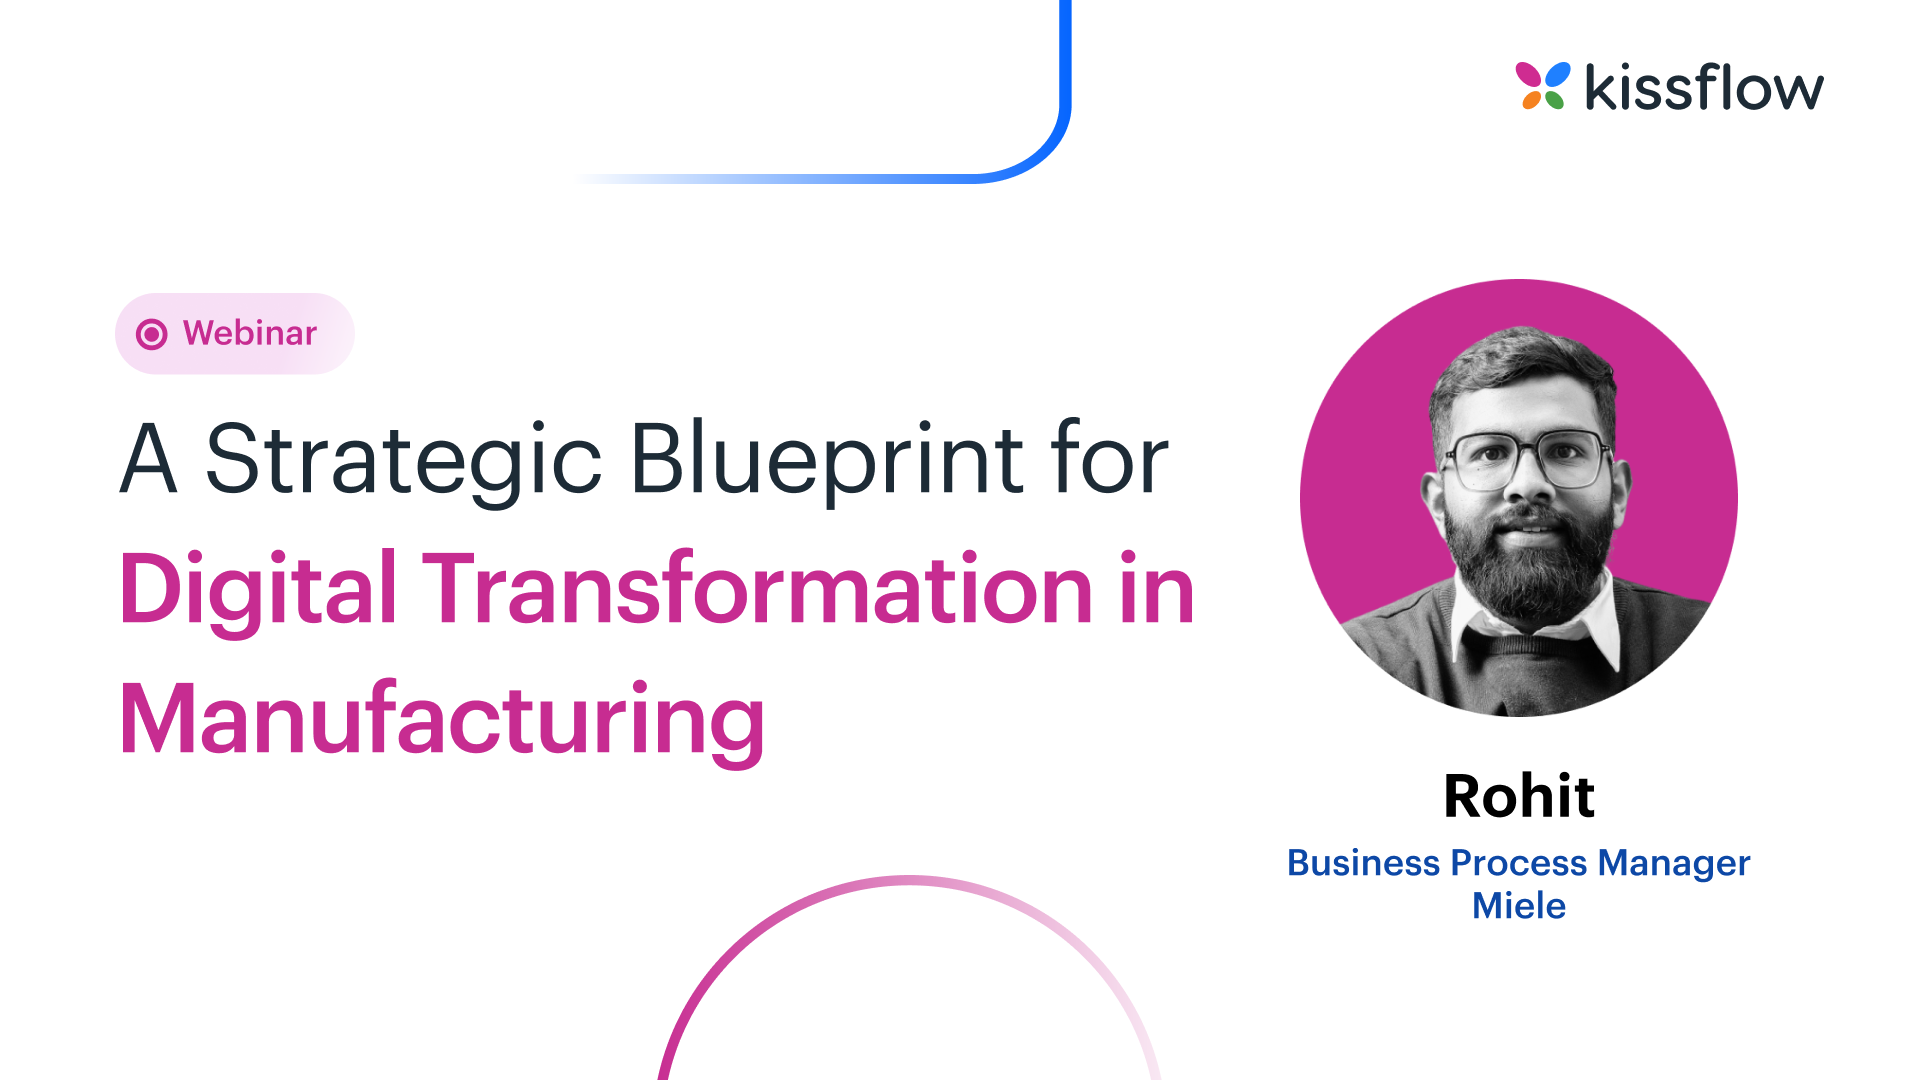 A Strategic Blueprint for Digital Transformation in Manufacturing